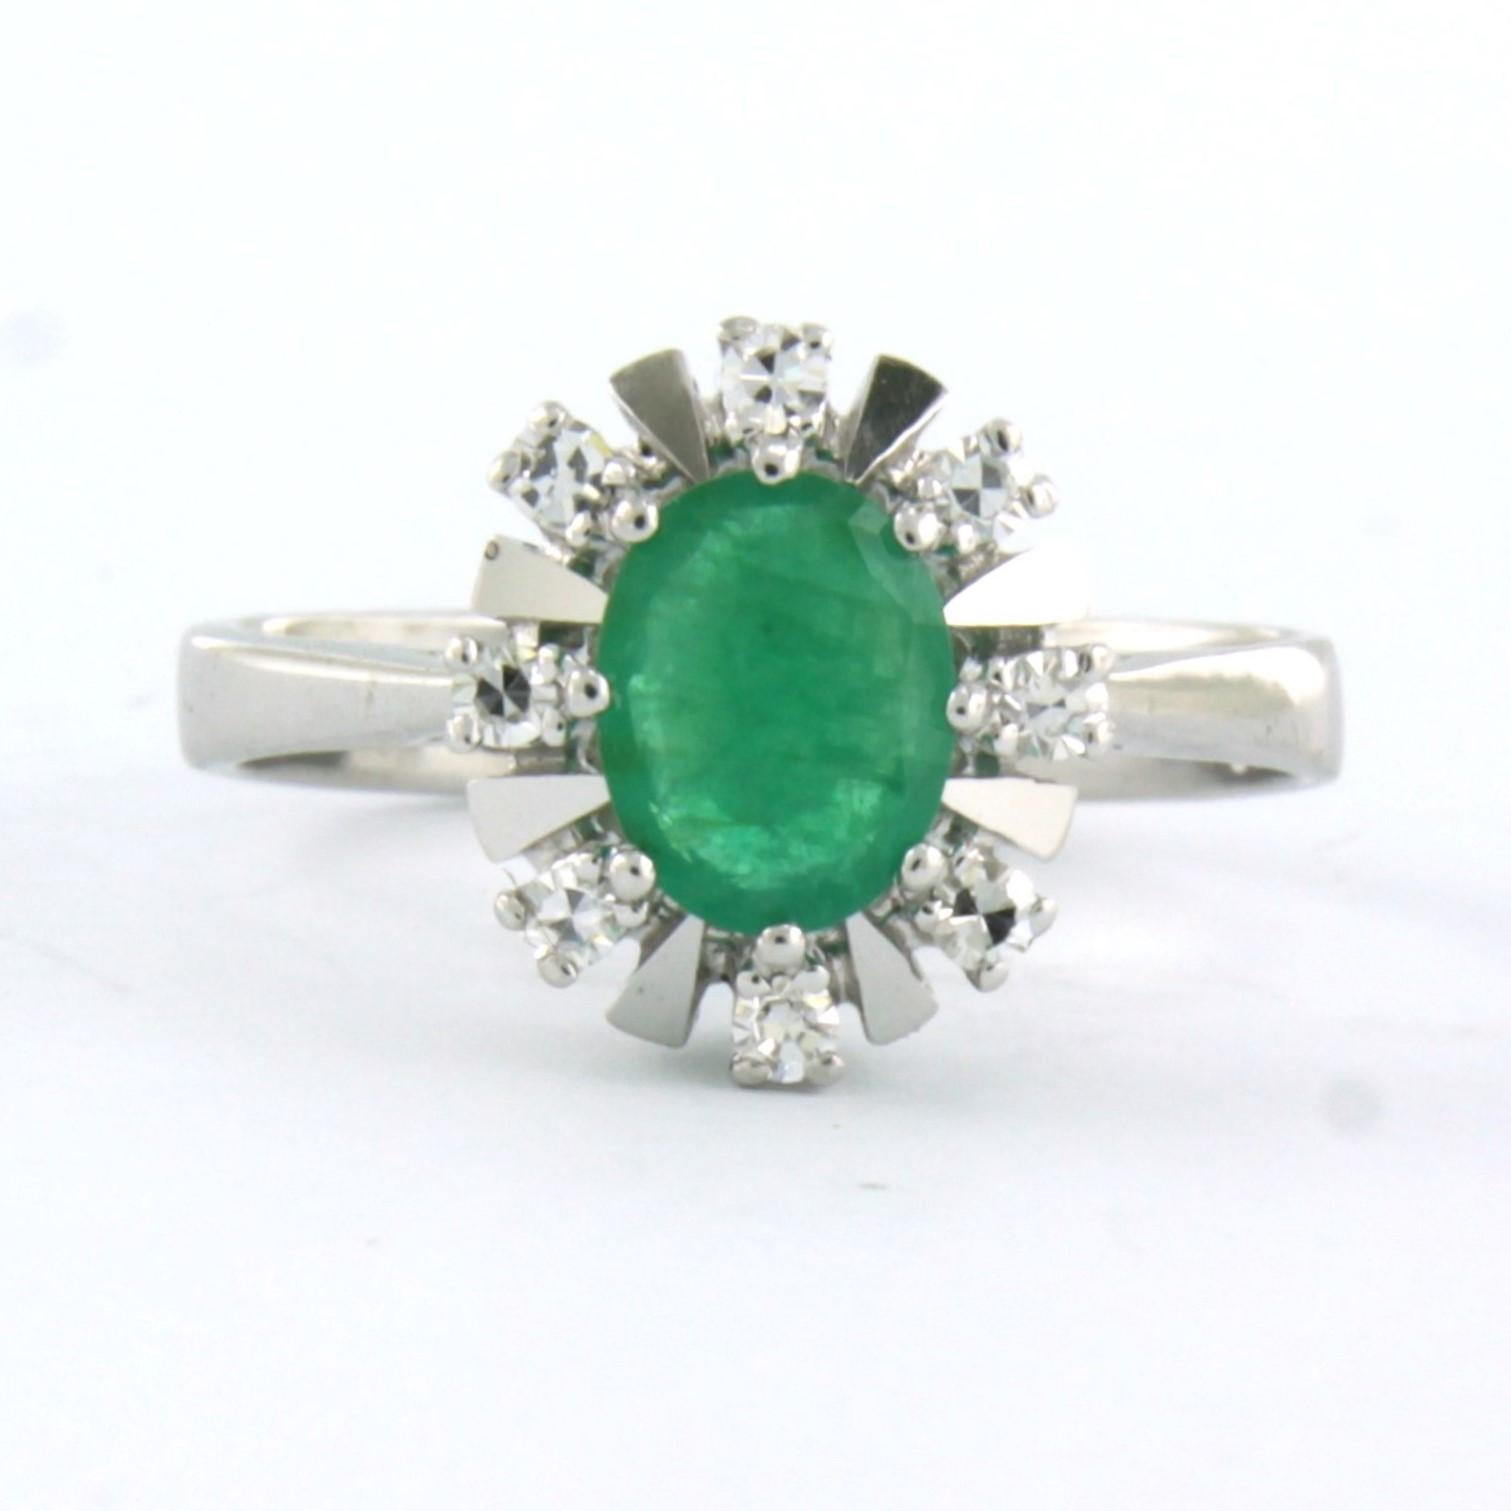 14k white gold ring set with emerald and single cut diamonds 0.16ct F/G VS/SI - ring size U.S. 7.5 - EU. 17.75 (56)

the top of the ring is 1.2 cm wide and 7.0 mm high

Ring size US 7.5 - EU. 17.75 (56), ring can be enlarged or reduced a few sizes